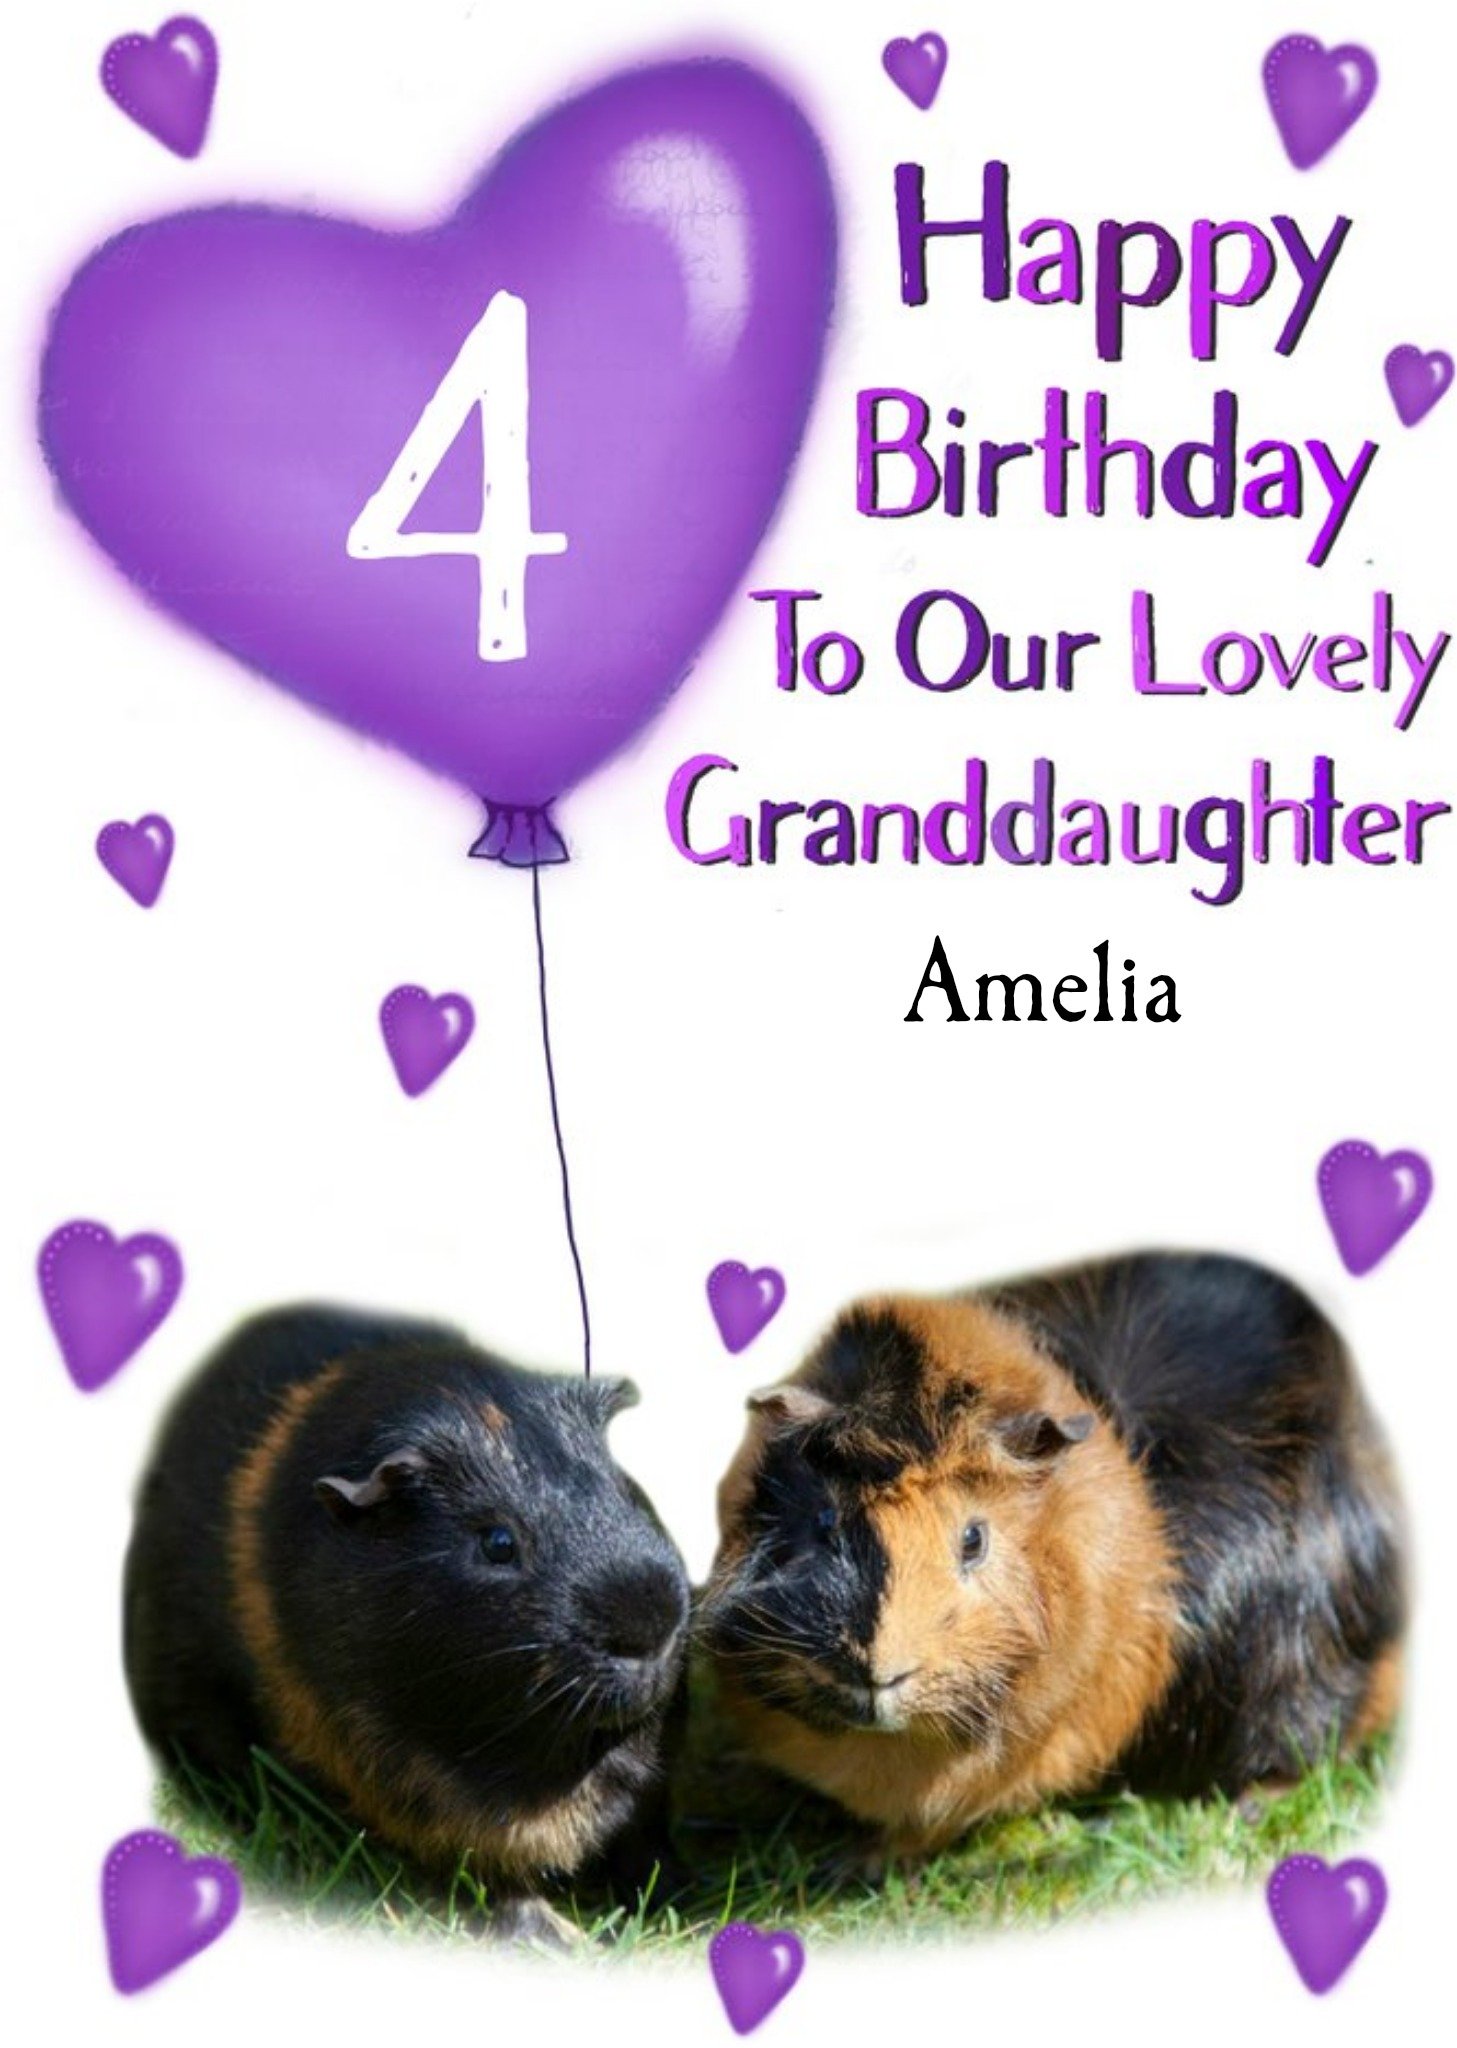 Moonpig Photo Of Guinea Pigs With Birthday Balloon Granddaughter 4th Birthday Card, Large